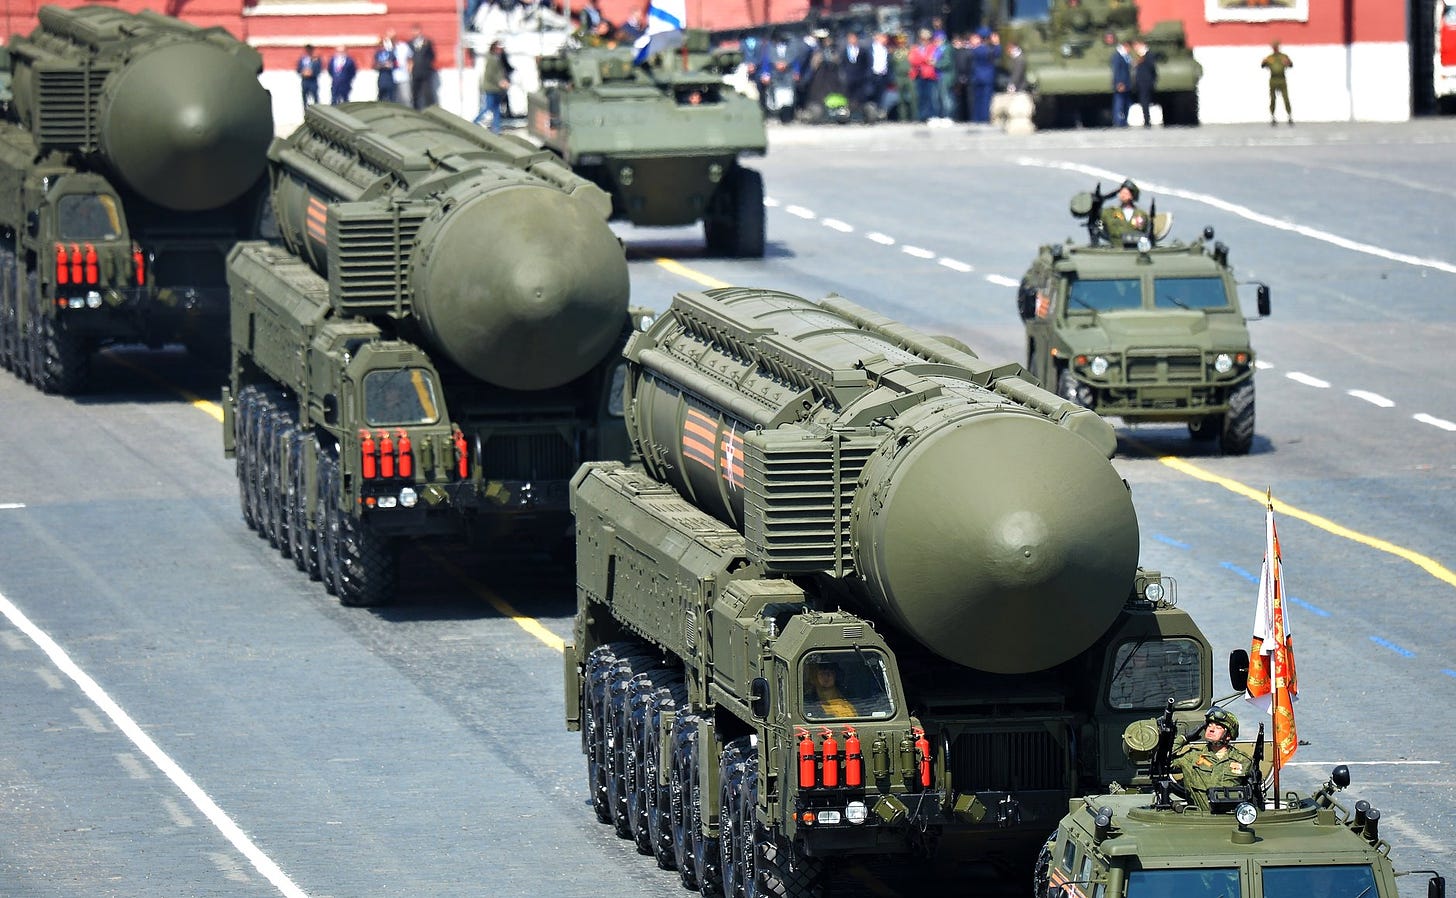 Meet "Dead Hand": This Might Be Russia's Most Terrifying Nuclear Weapons  Idea Yet | The National Interest